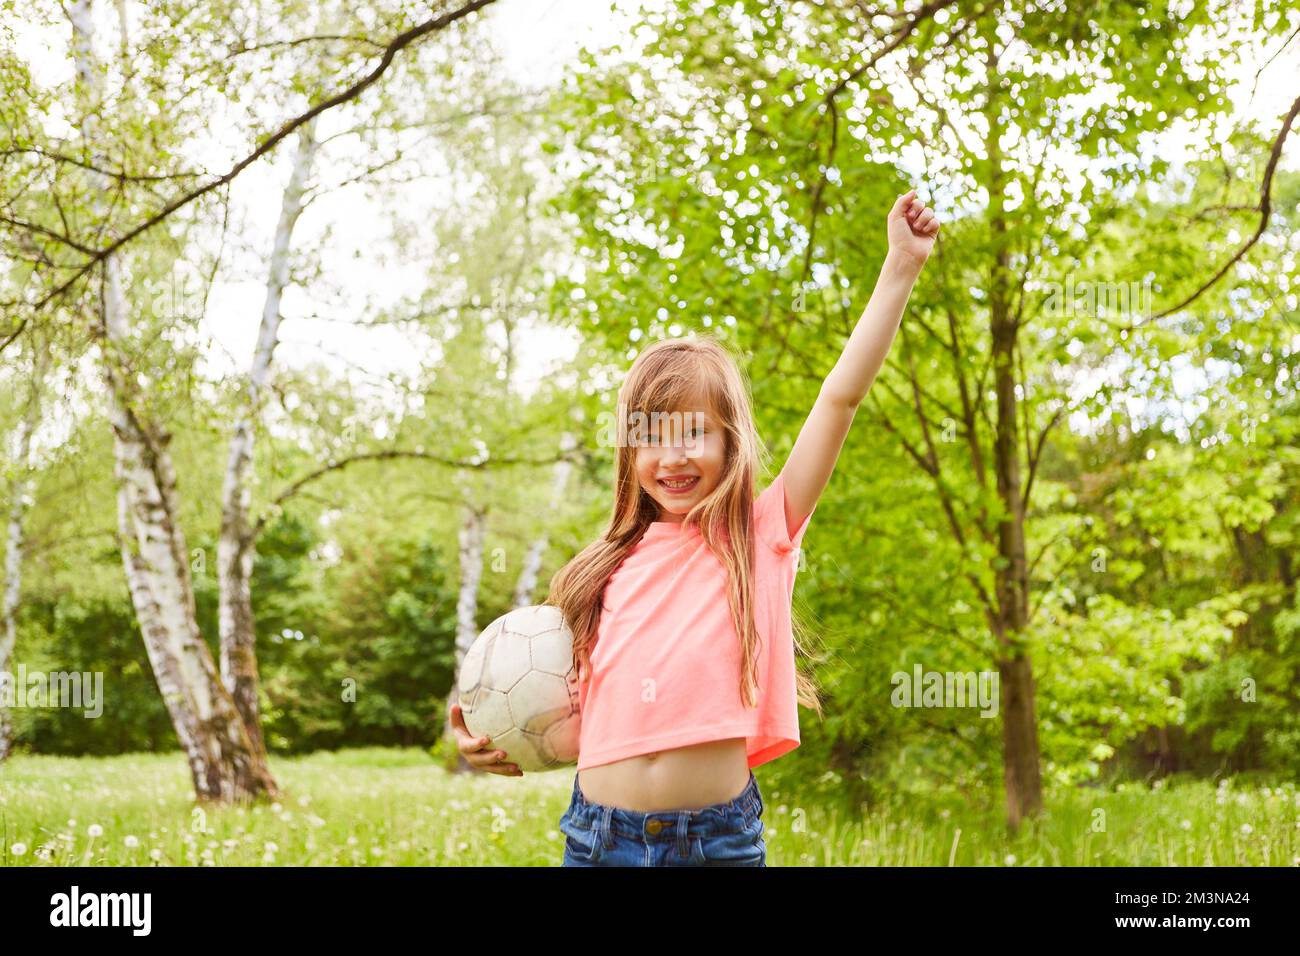 Portrait of smiling girl winning soccer game in park during summer holiday Stock Photo